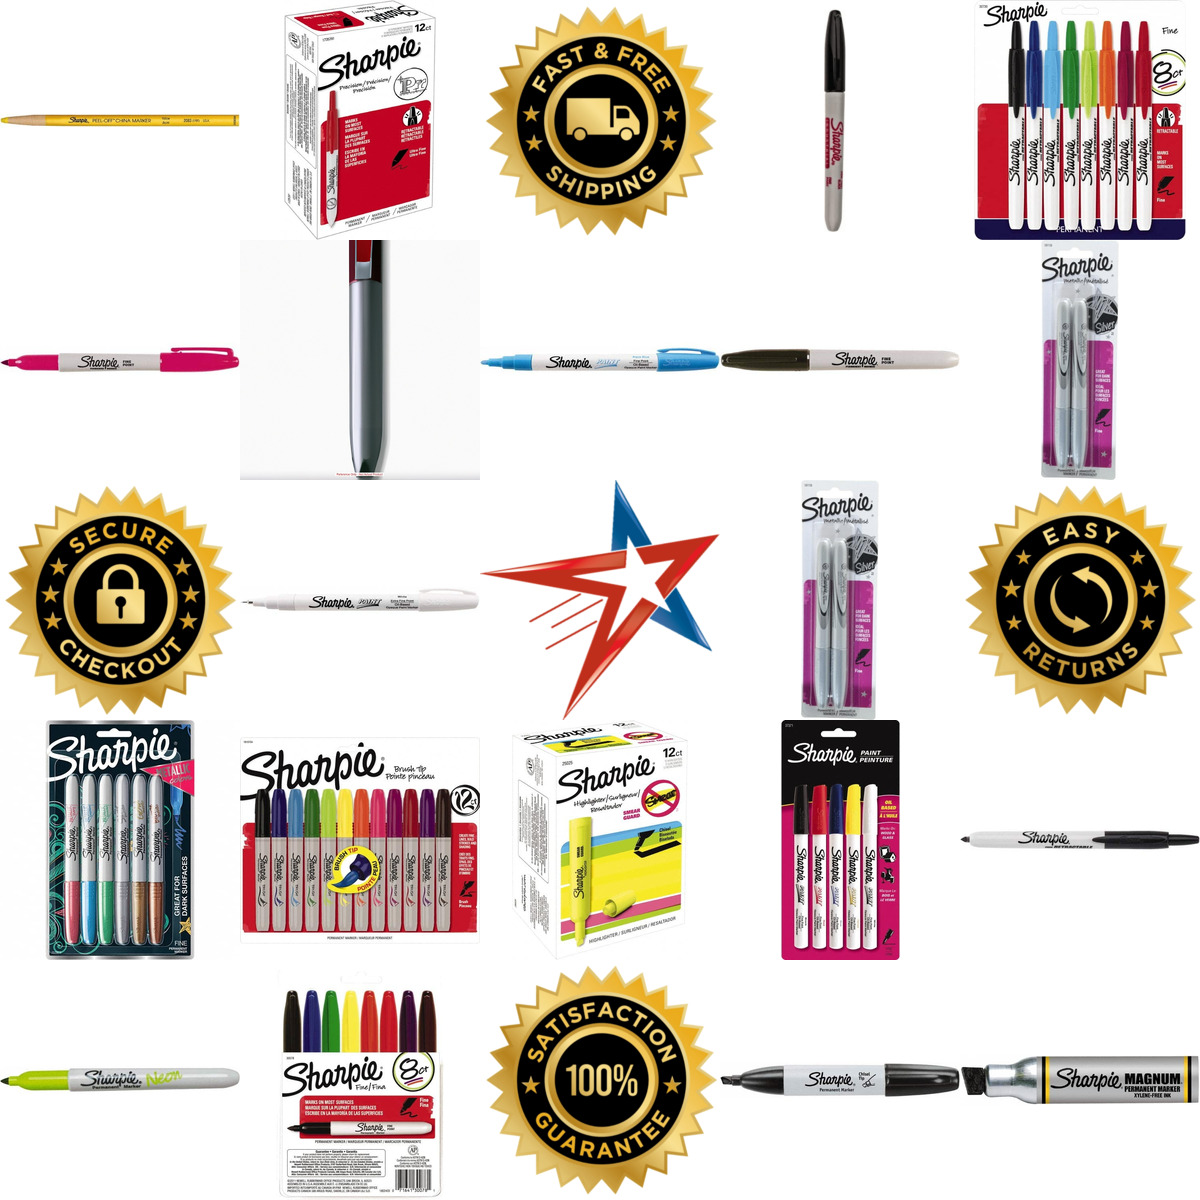 A selection of Sharpie products on GoVets